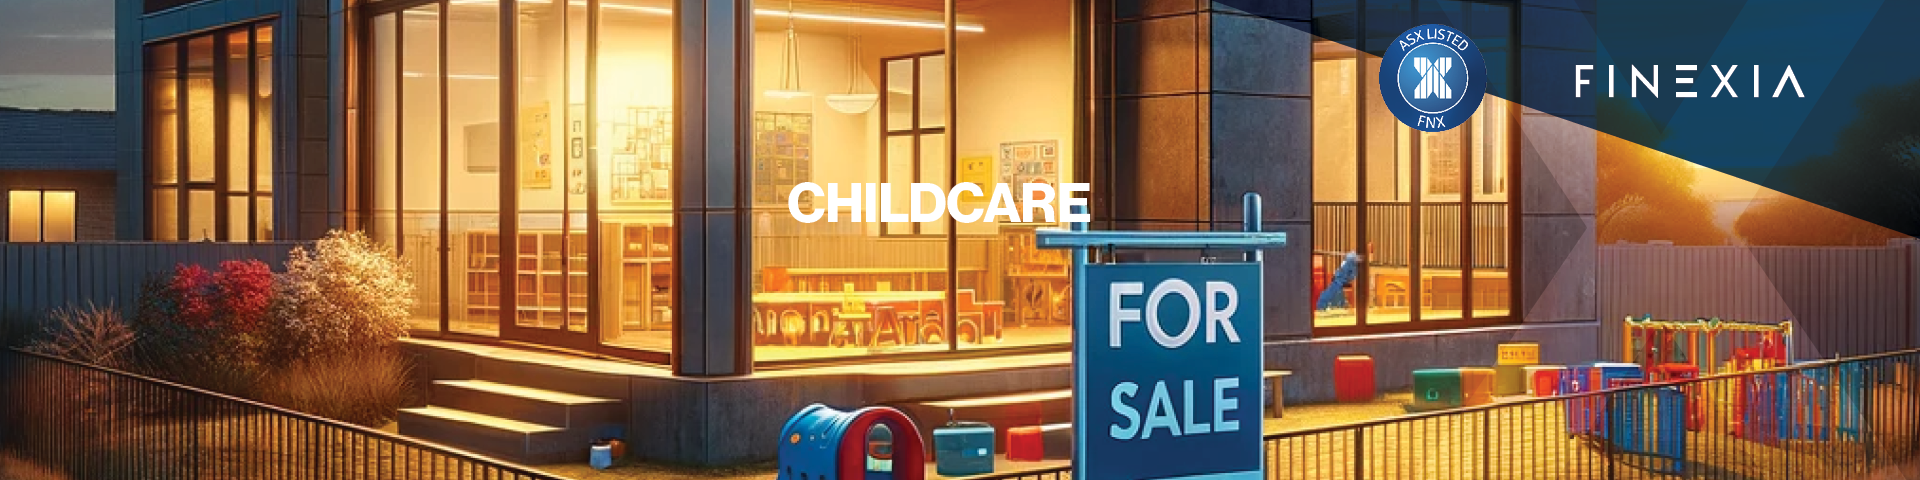 5 Key Benefits of Investing in a Melbourne Childcare Business